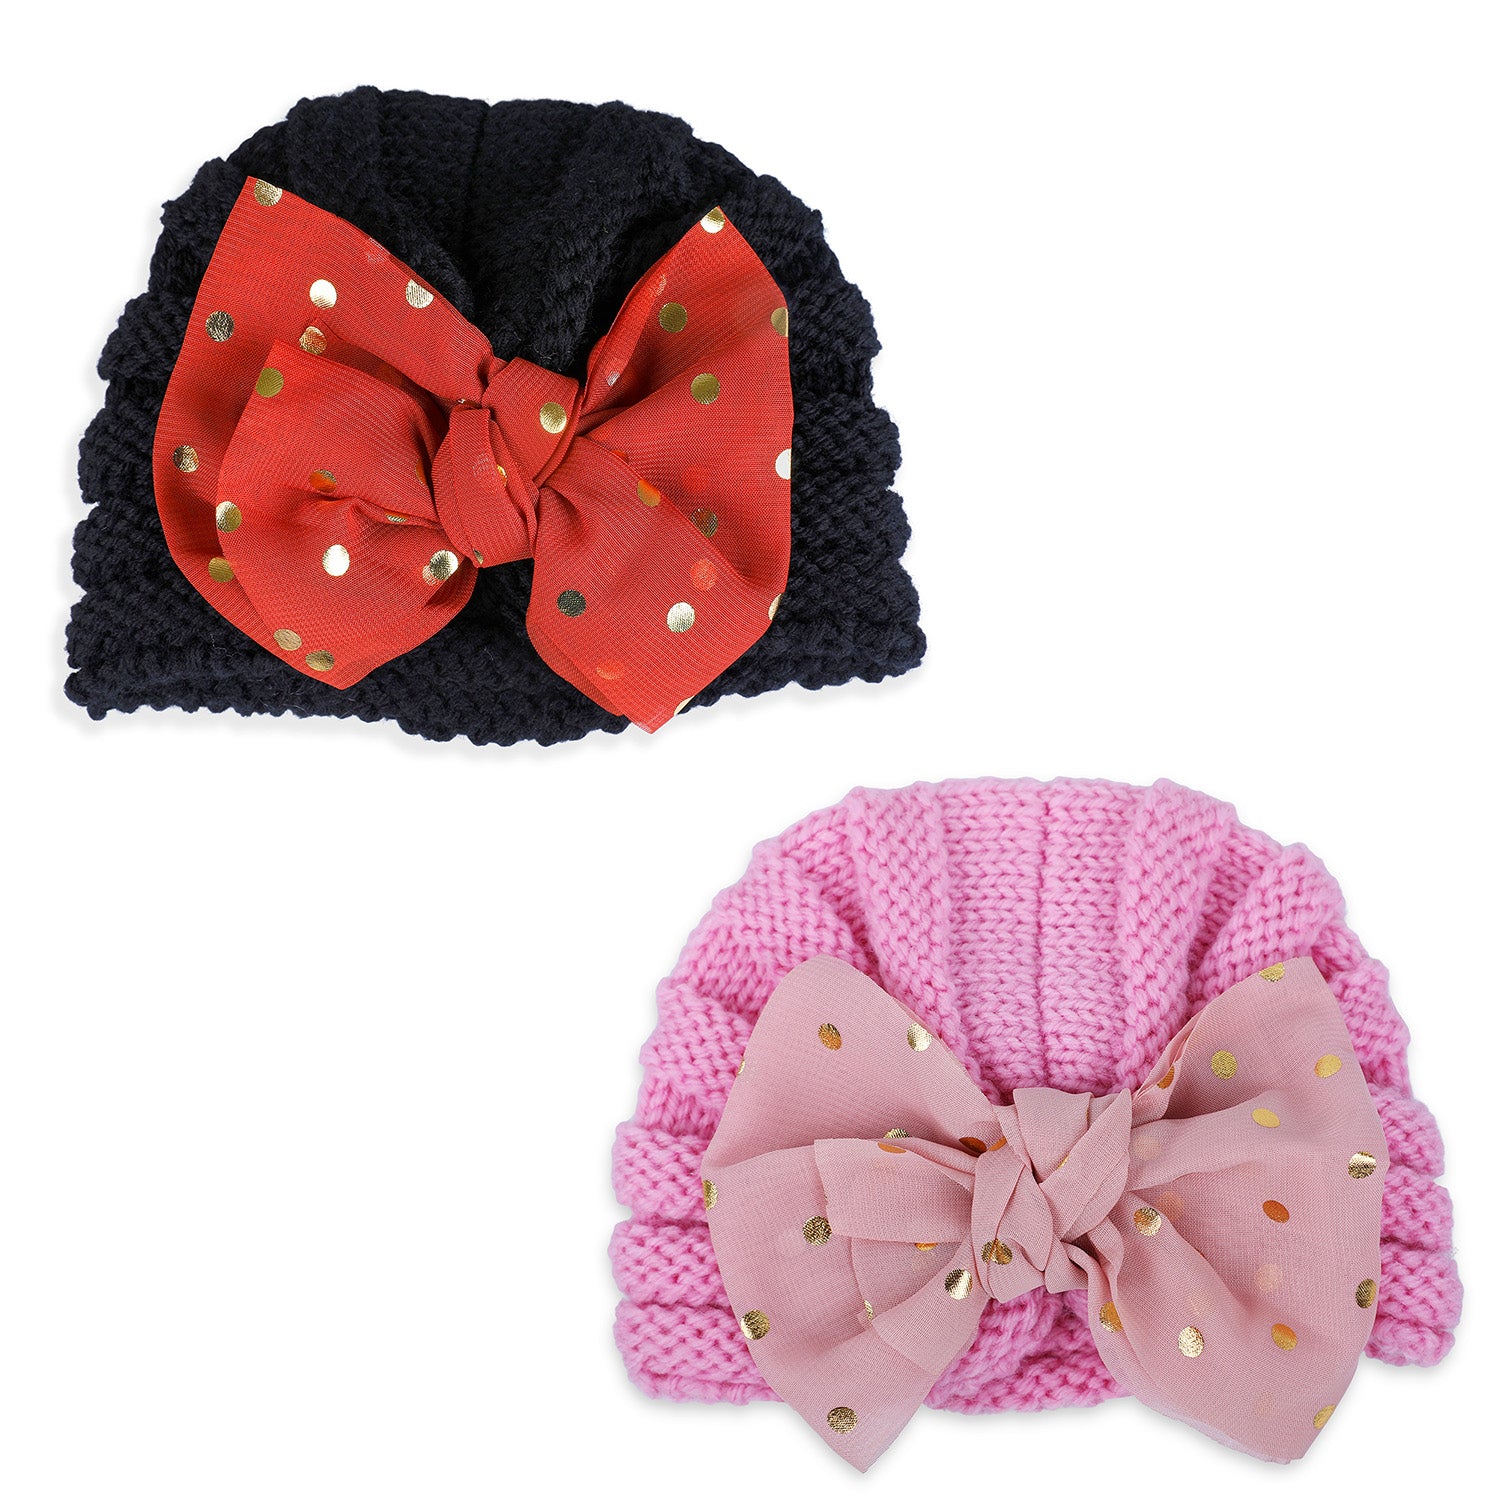 Baby Moo Partywear Sequence Bow 2 Pack Turban Caps - Black And Pink - Baby Moo